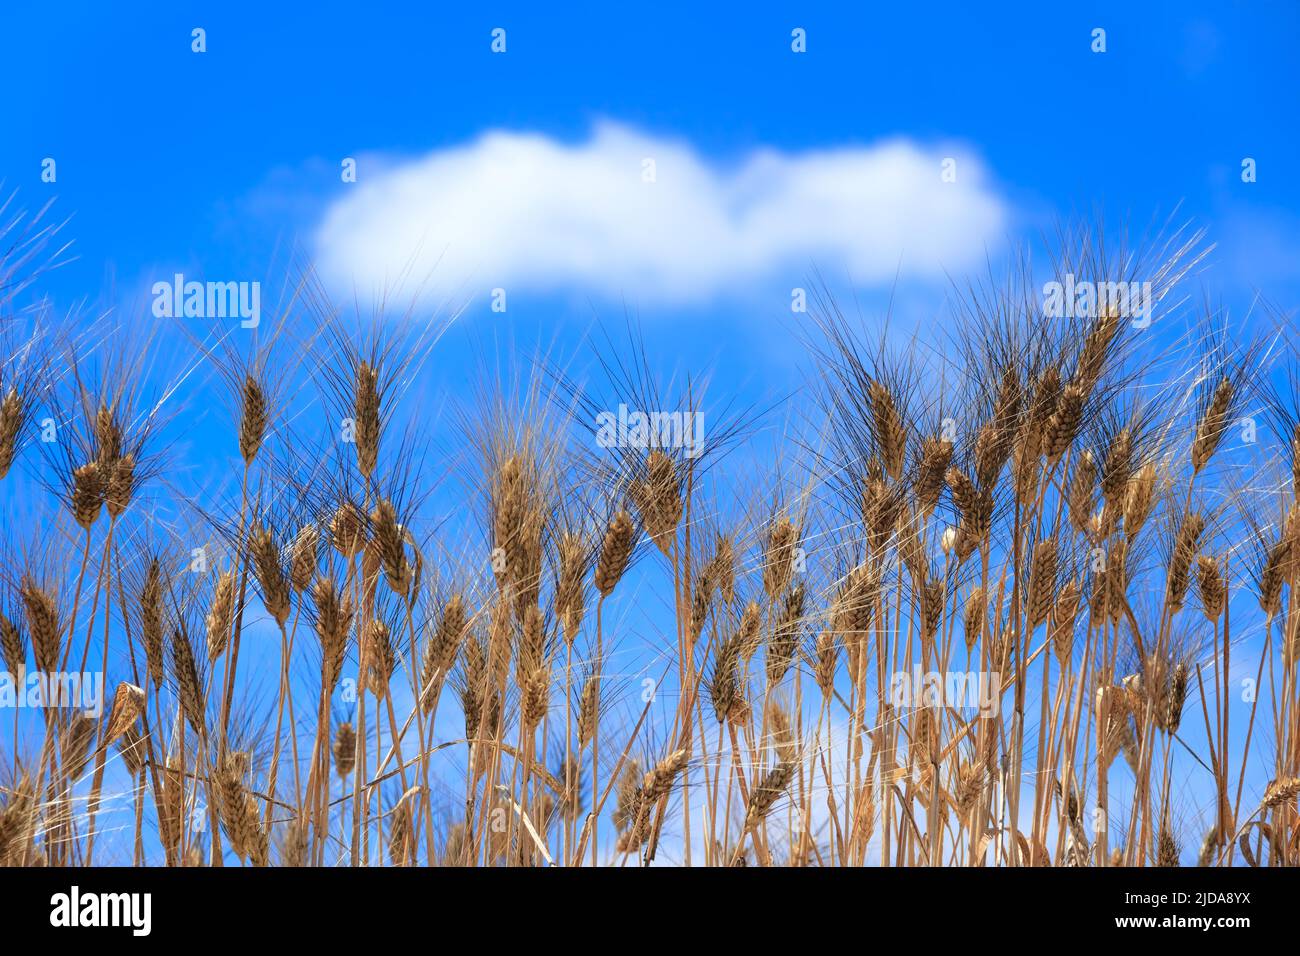 Ears of wheat on blue sky with cloud. Stock Photo